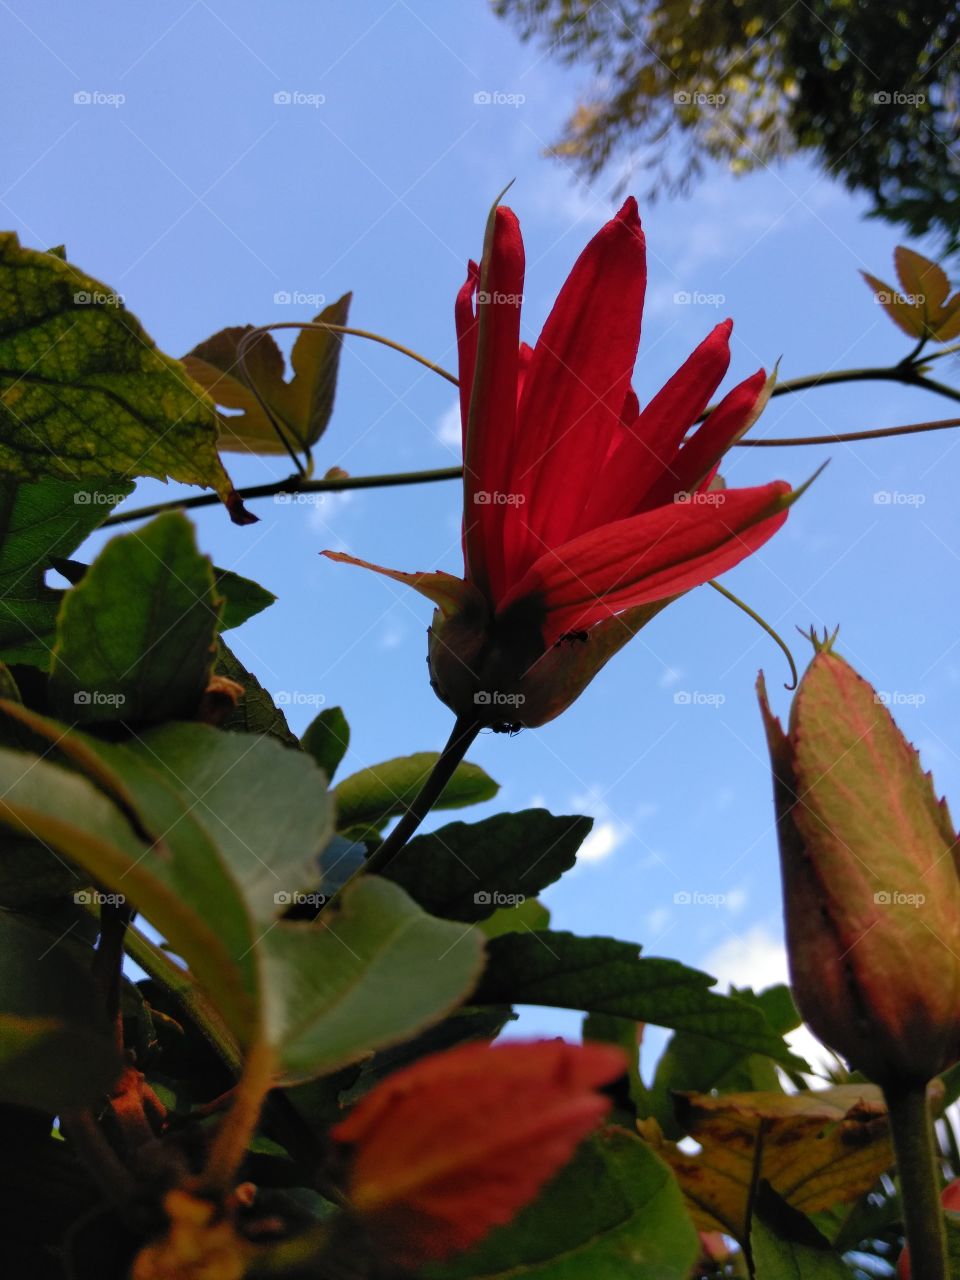 Passiflora Coccineal in the FL sun. tropical and colorful.